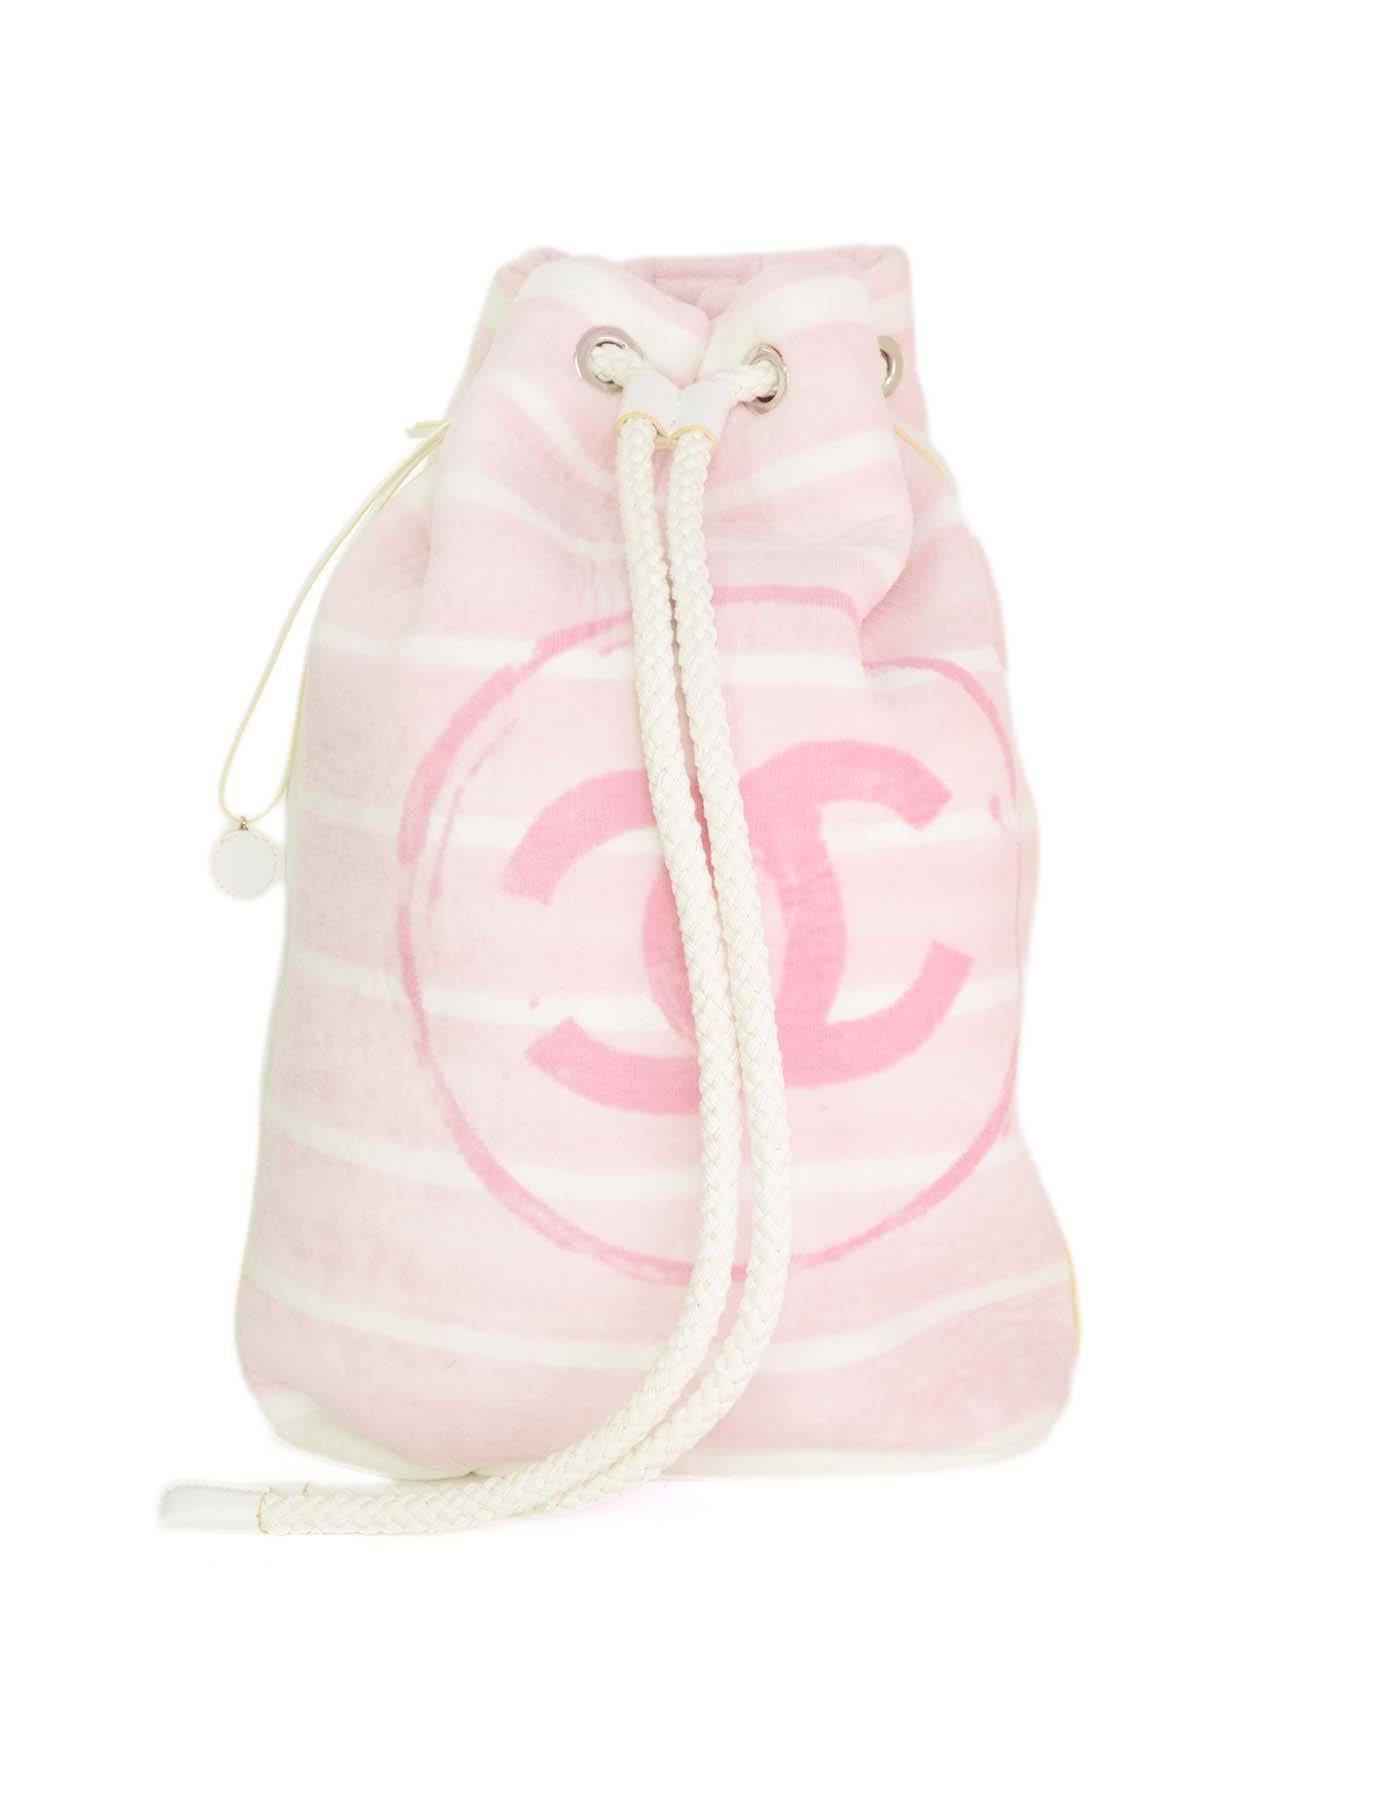 Chanel Pink & White Terrycloth Bag & Beach Towel Set 
Both bag and towel feature white stripes with large pink CC printed in center
Made In: Italy
Year of Production: 2011
Color: White and pink
Hardware: Bag- silvertone
Materials: